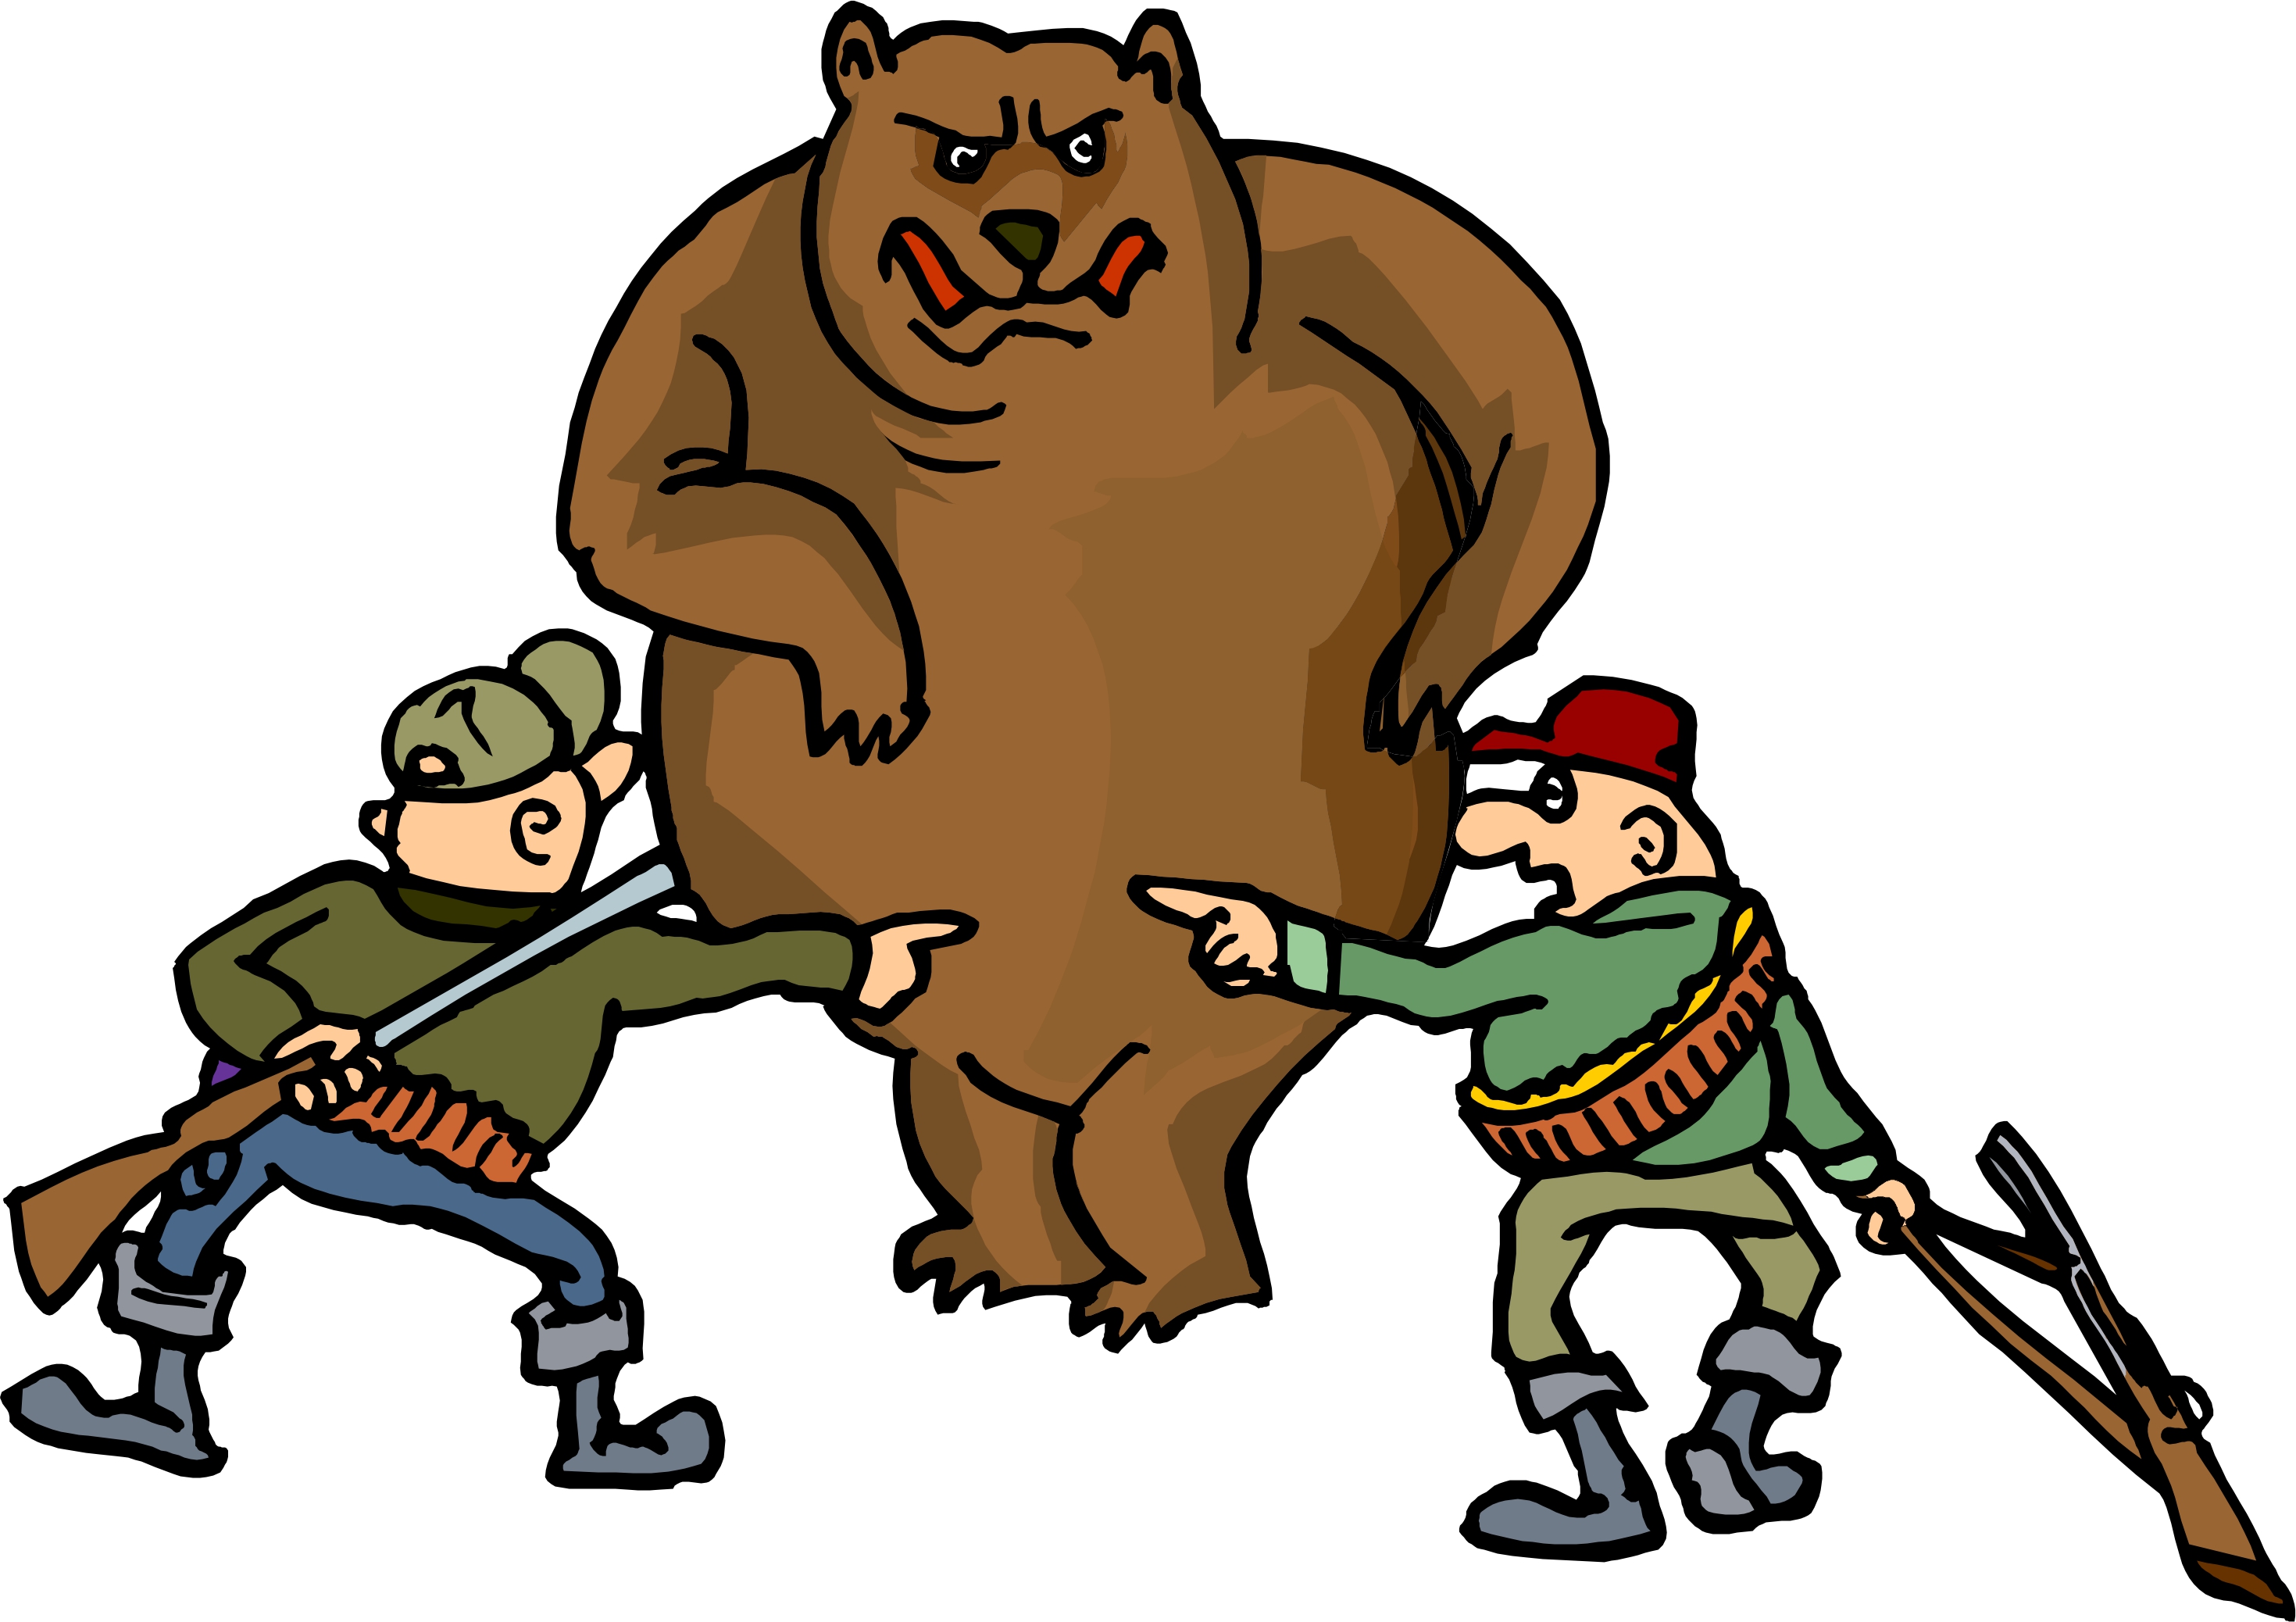 Angry Bear Cartoon Images & Pictures - Becuo